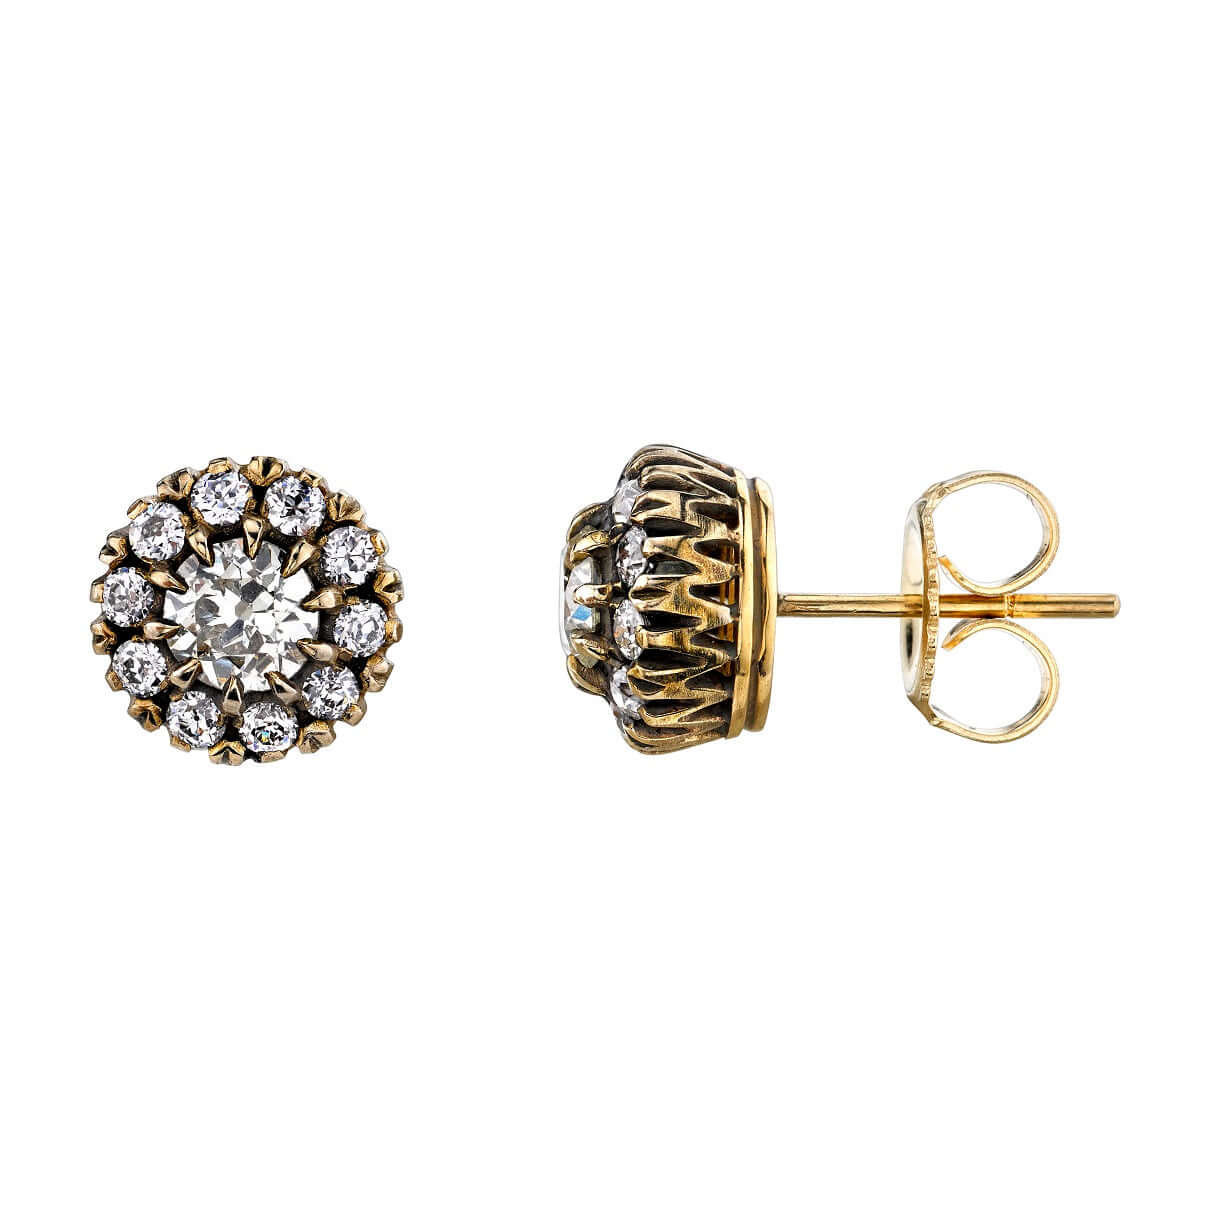 SINGLE STONE TALIA STUDS | Earrings featuring 0.66ctw G-H/VS old European cut diamonds prong set in handcrafted oxidized 18K yellow and champagne gold cluster stud earrings.